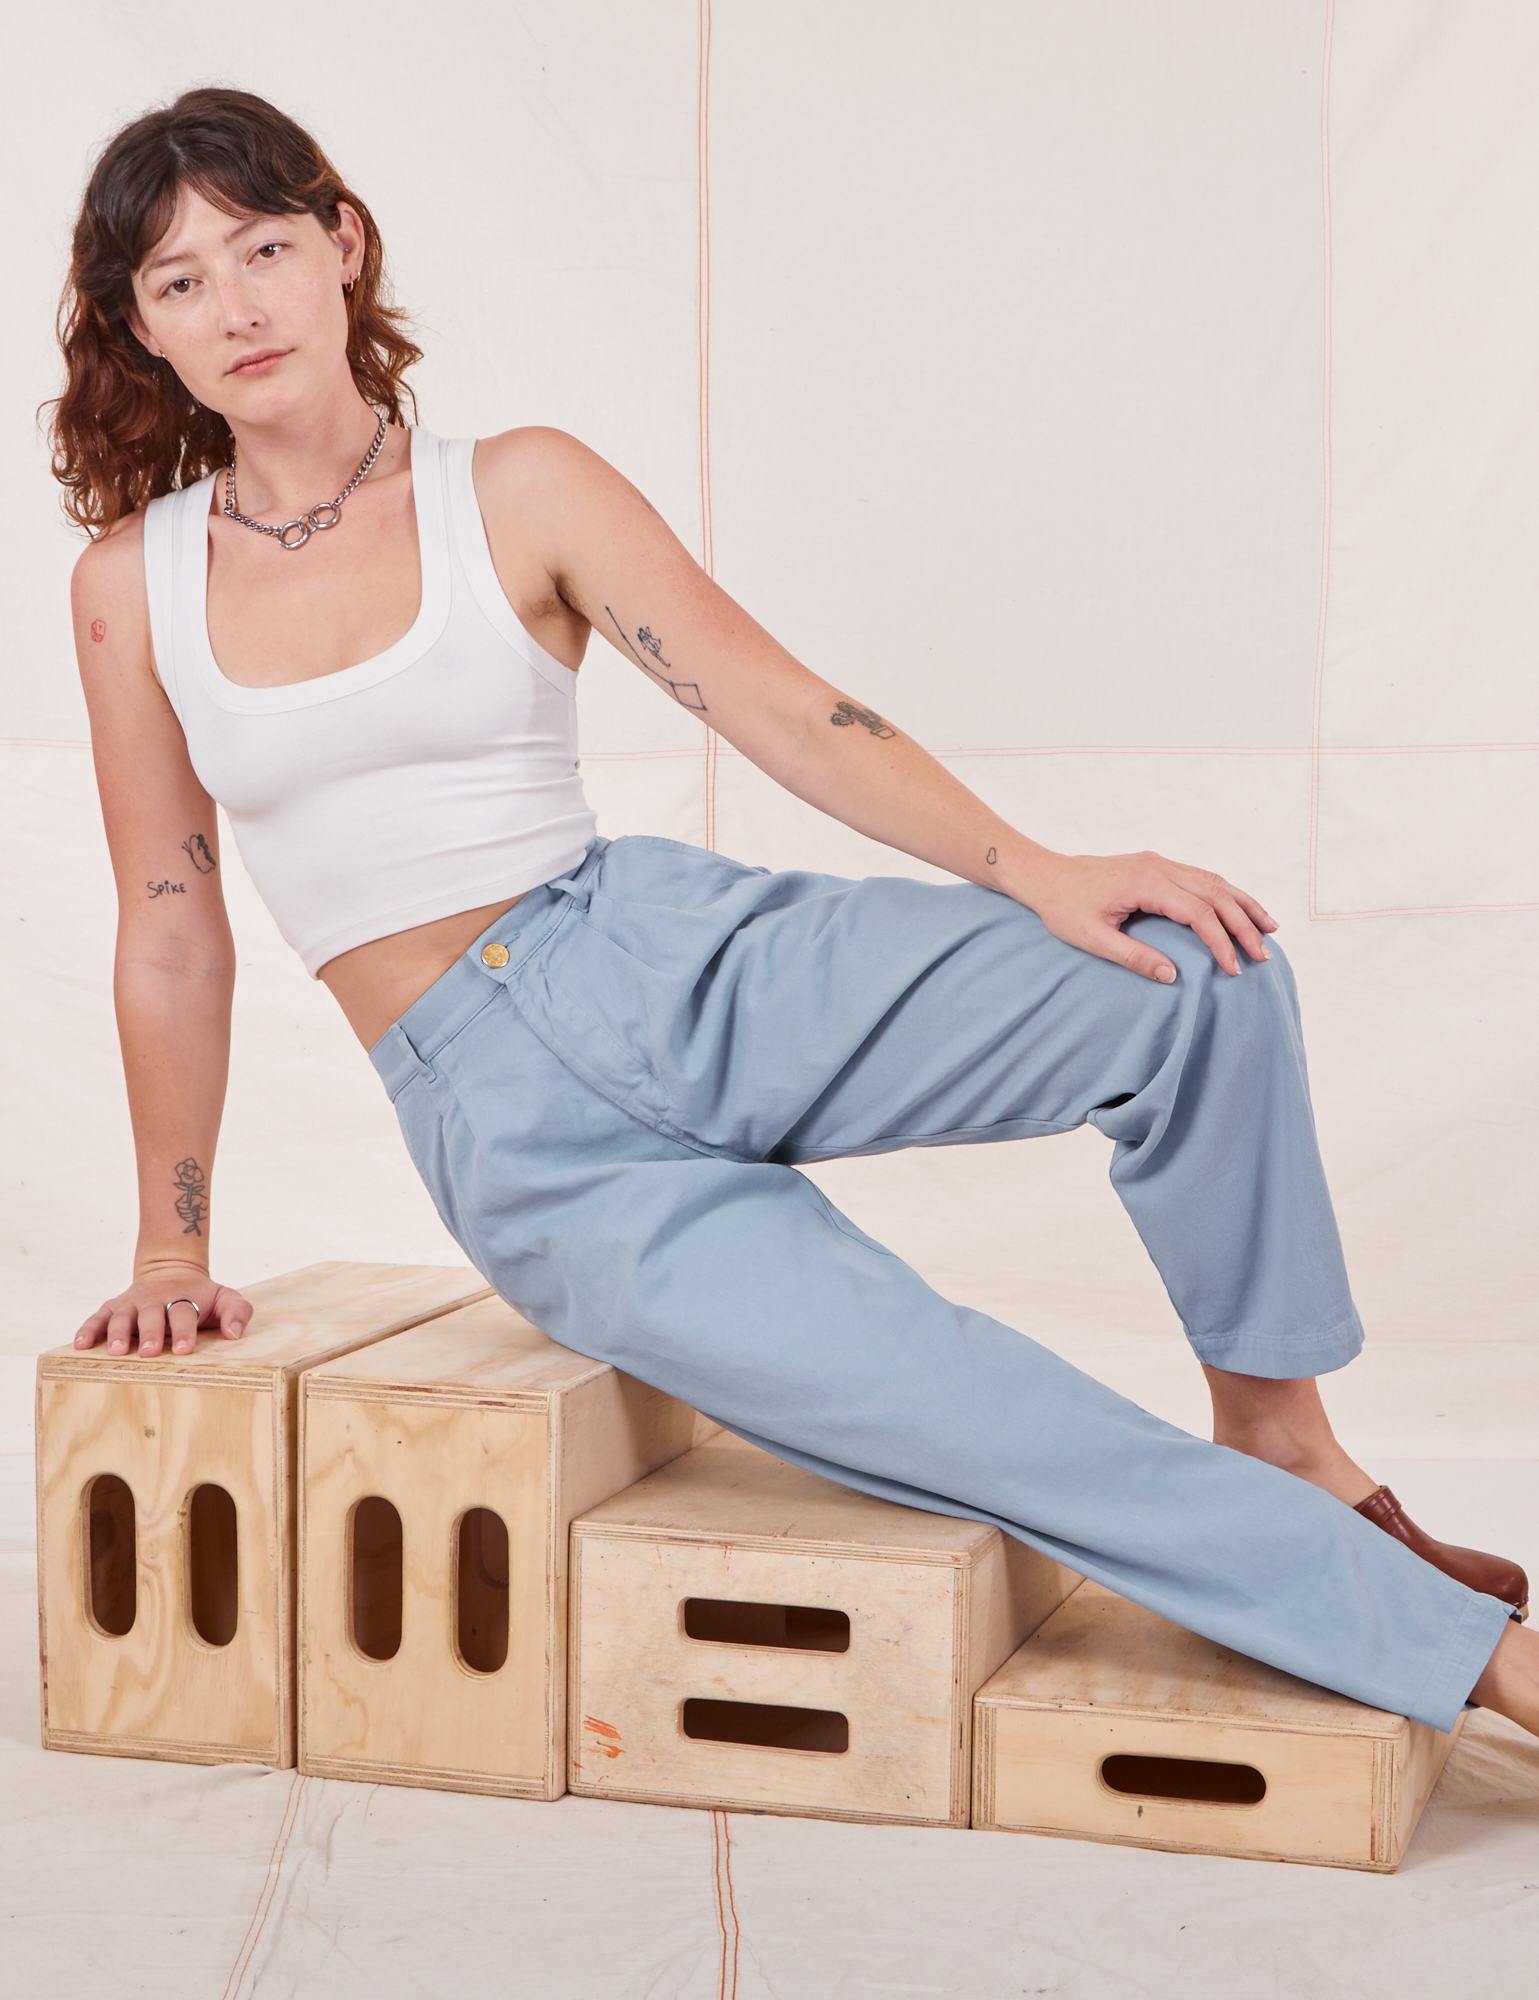 Alex is wearing Heavyweight Trousers in Periwinkle and vintage off-white Cropped Tank Top